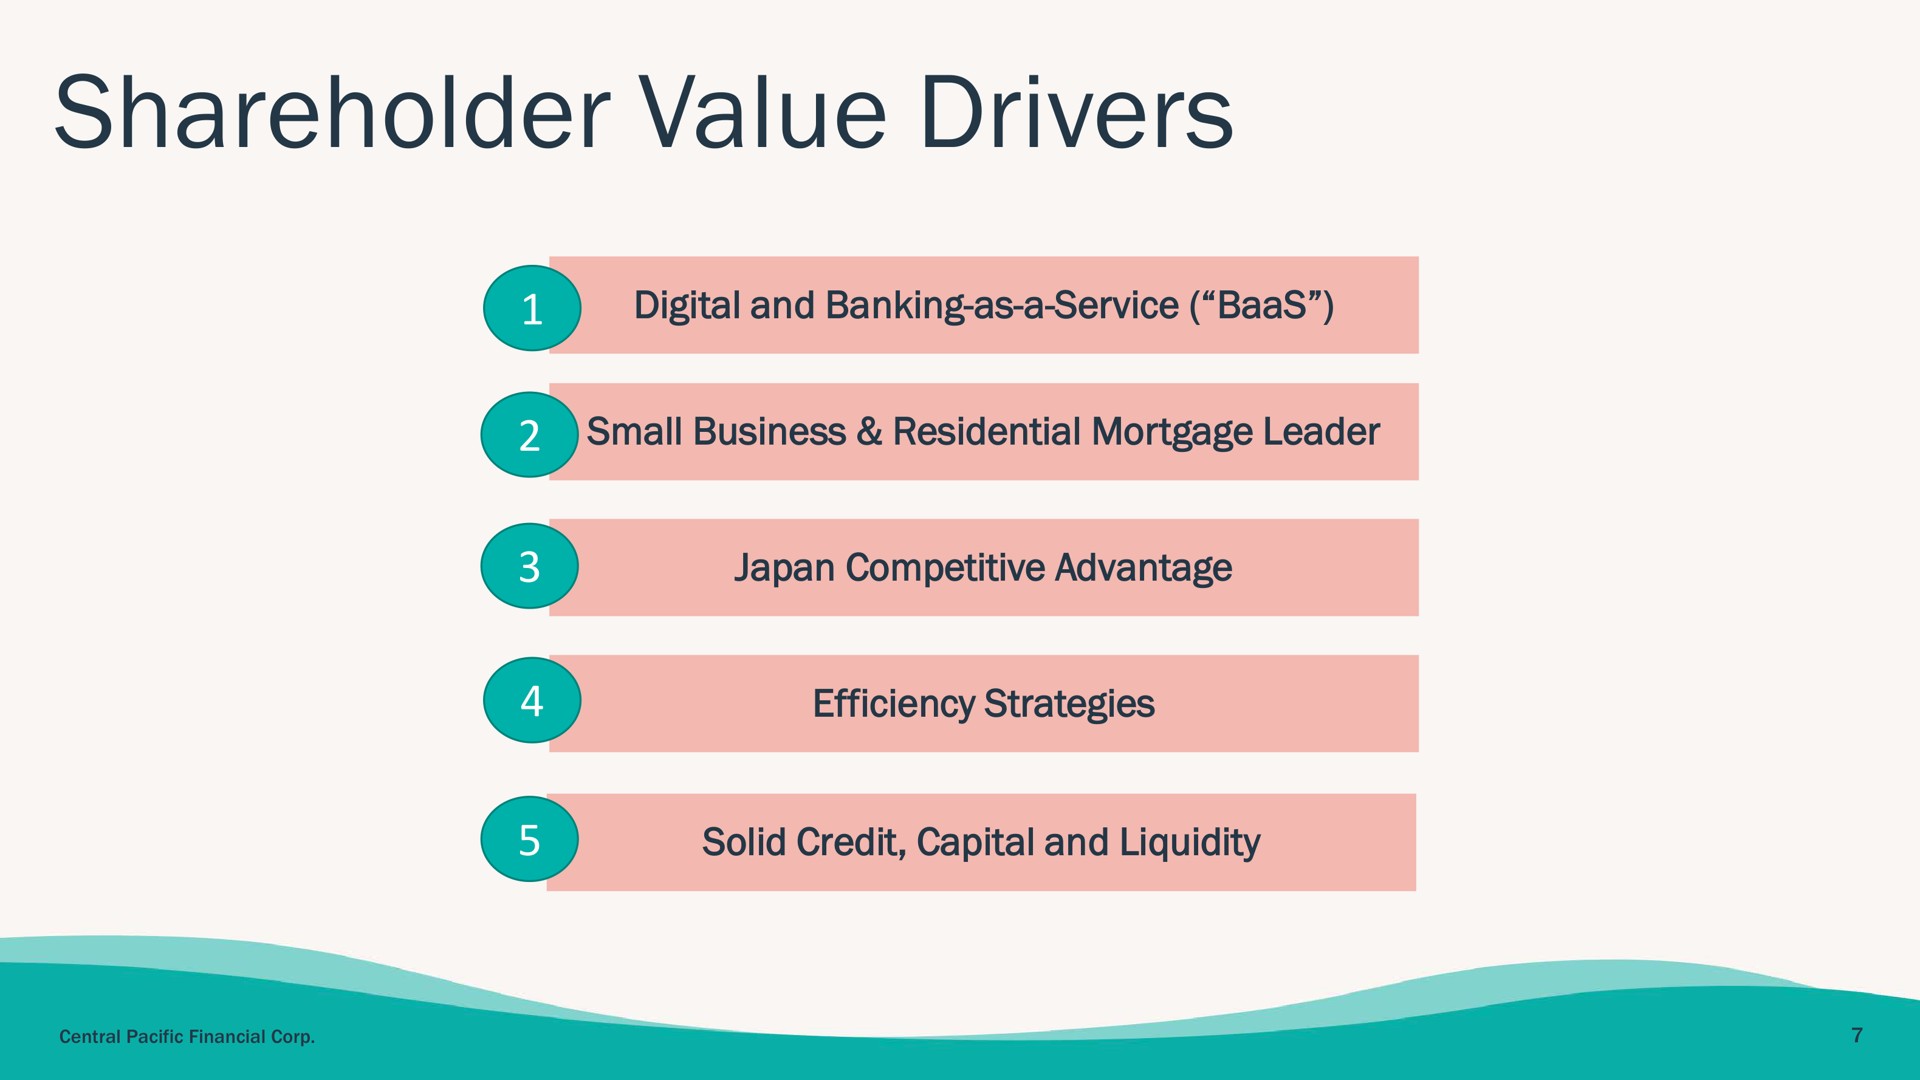 shareholder value drivers | Central Pacific Financial